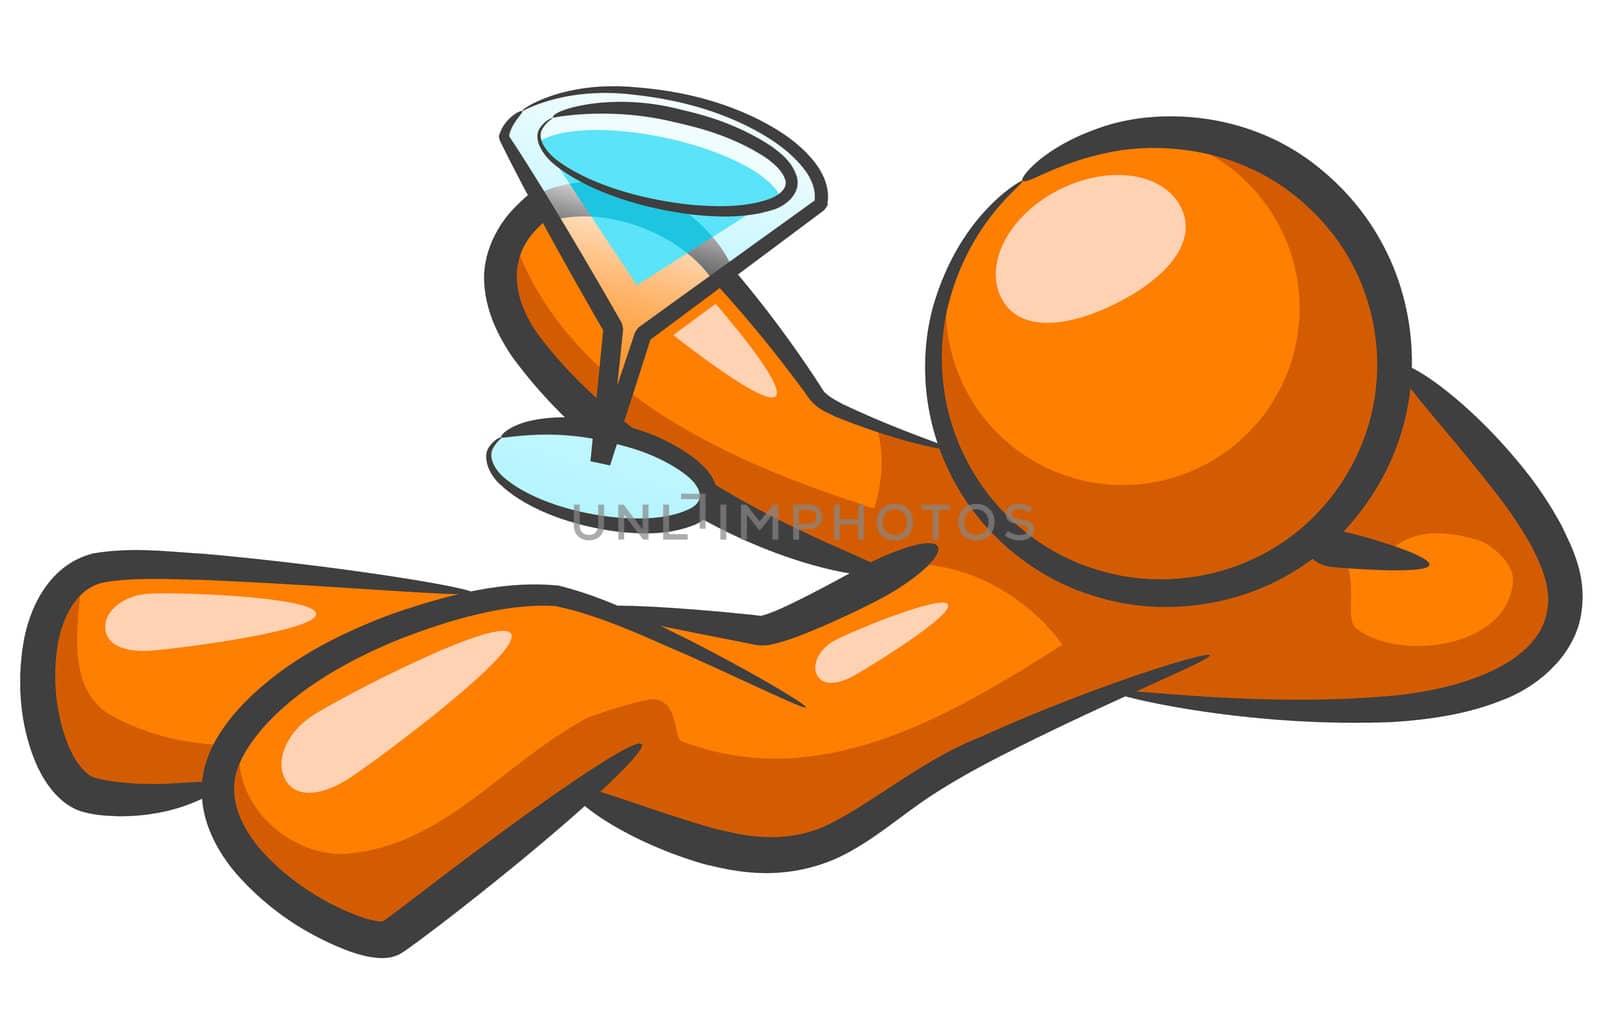 Orange Man Laid Back with Drink by LeoBlanchette